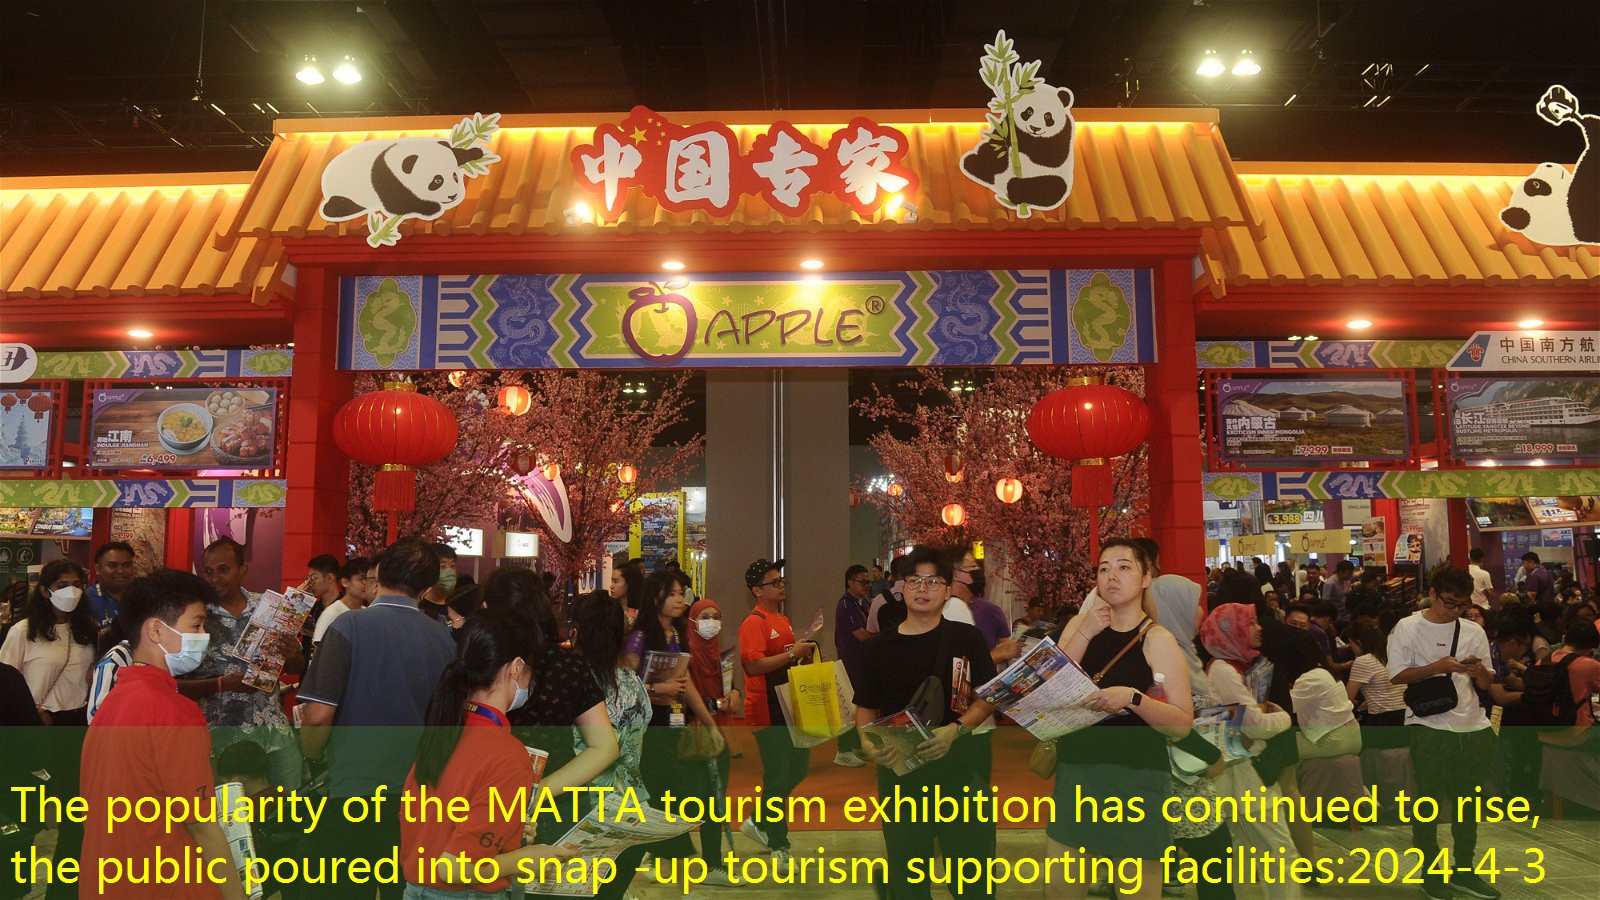 The popularity of the MATTA tourism exhibition has continued to rise, the public poured into snap -up tourism supporting facilities